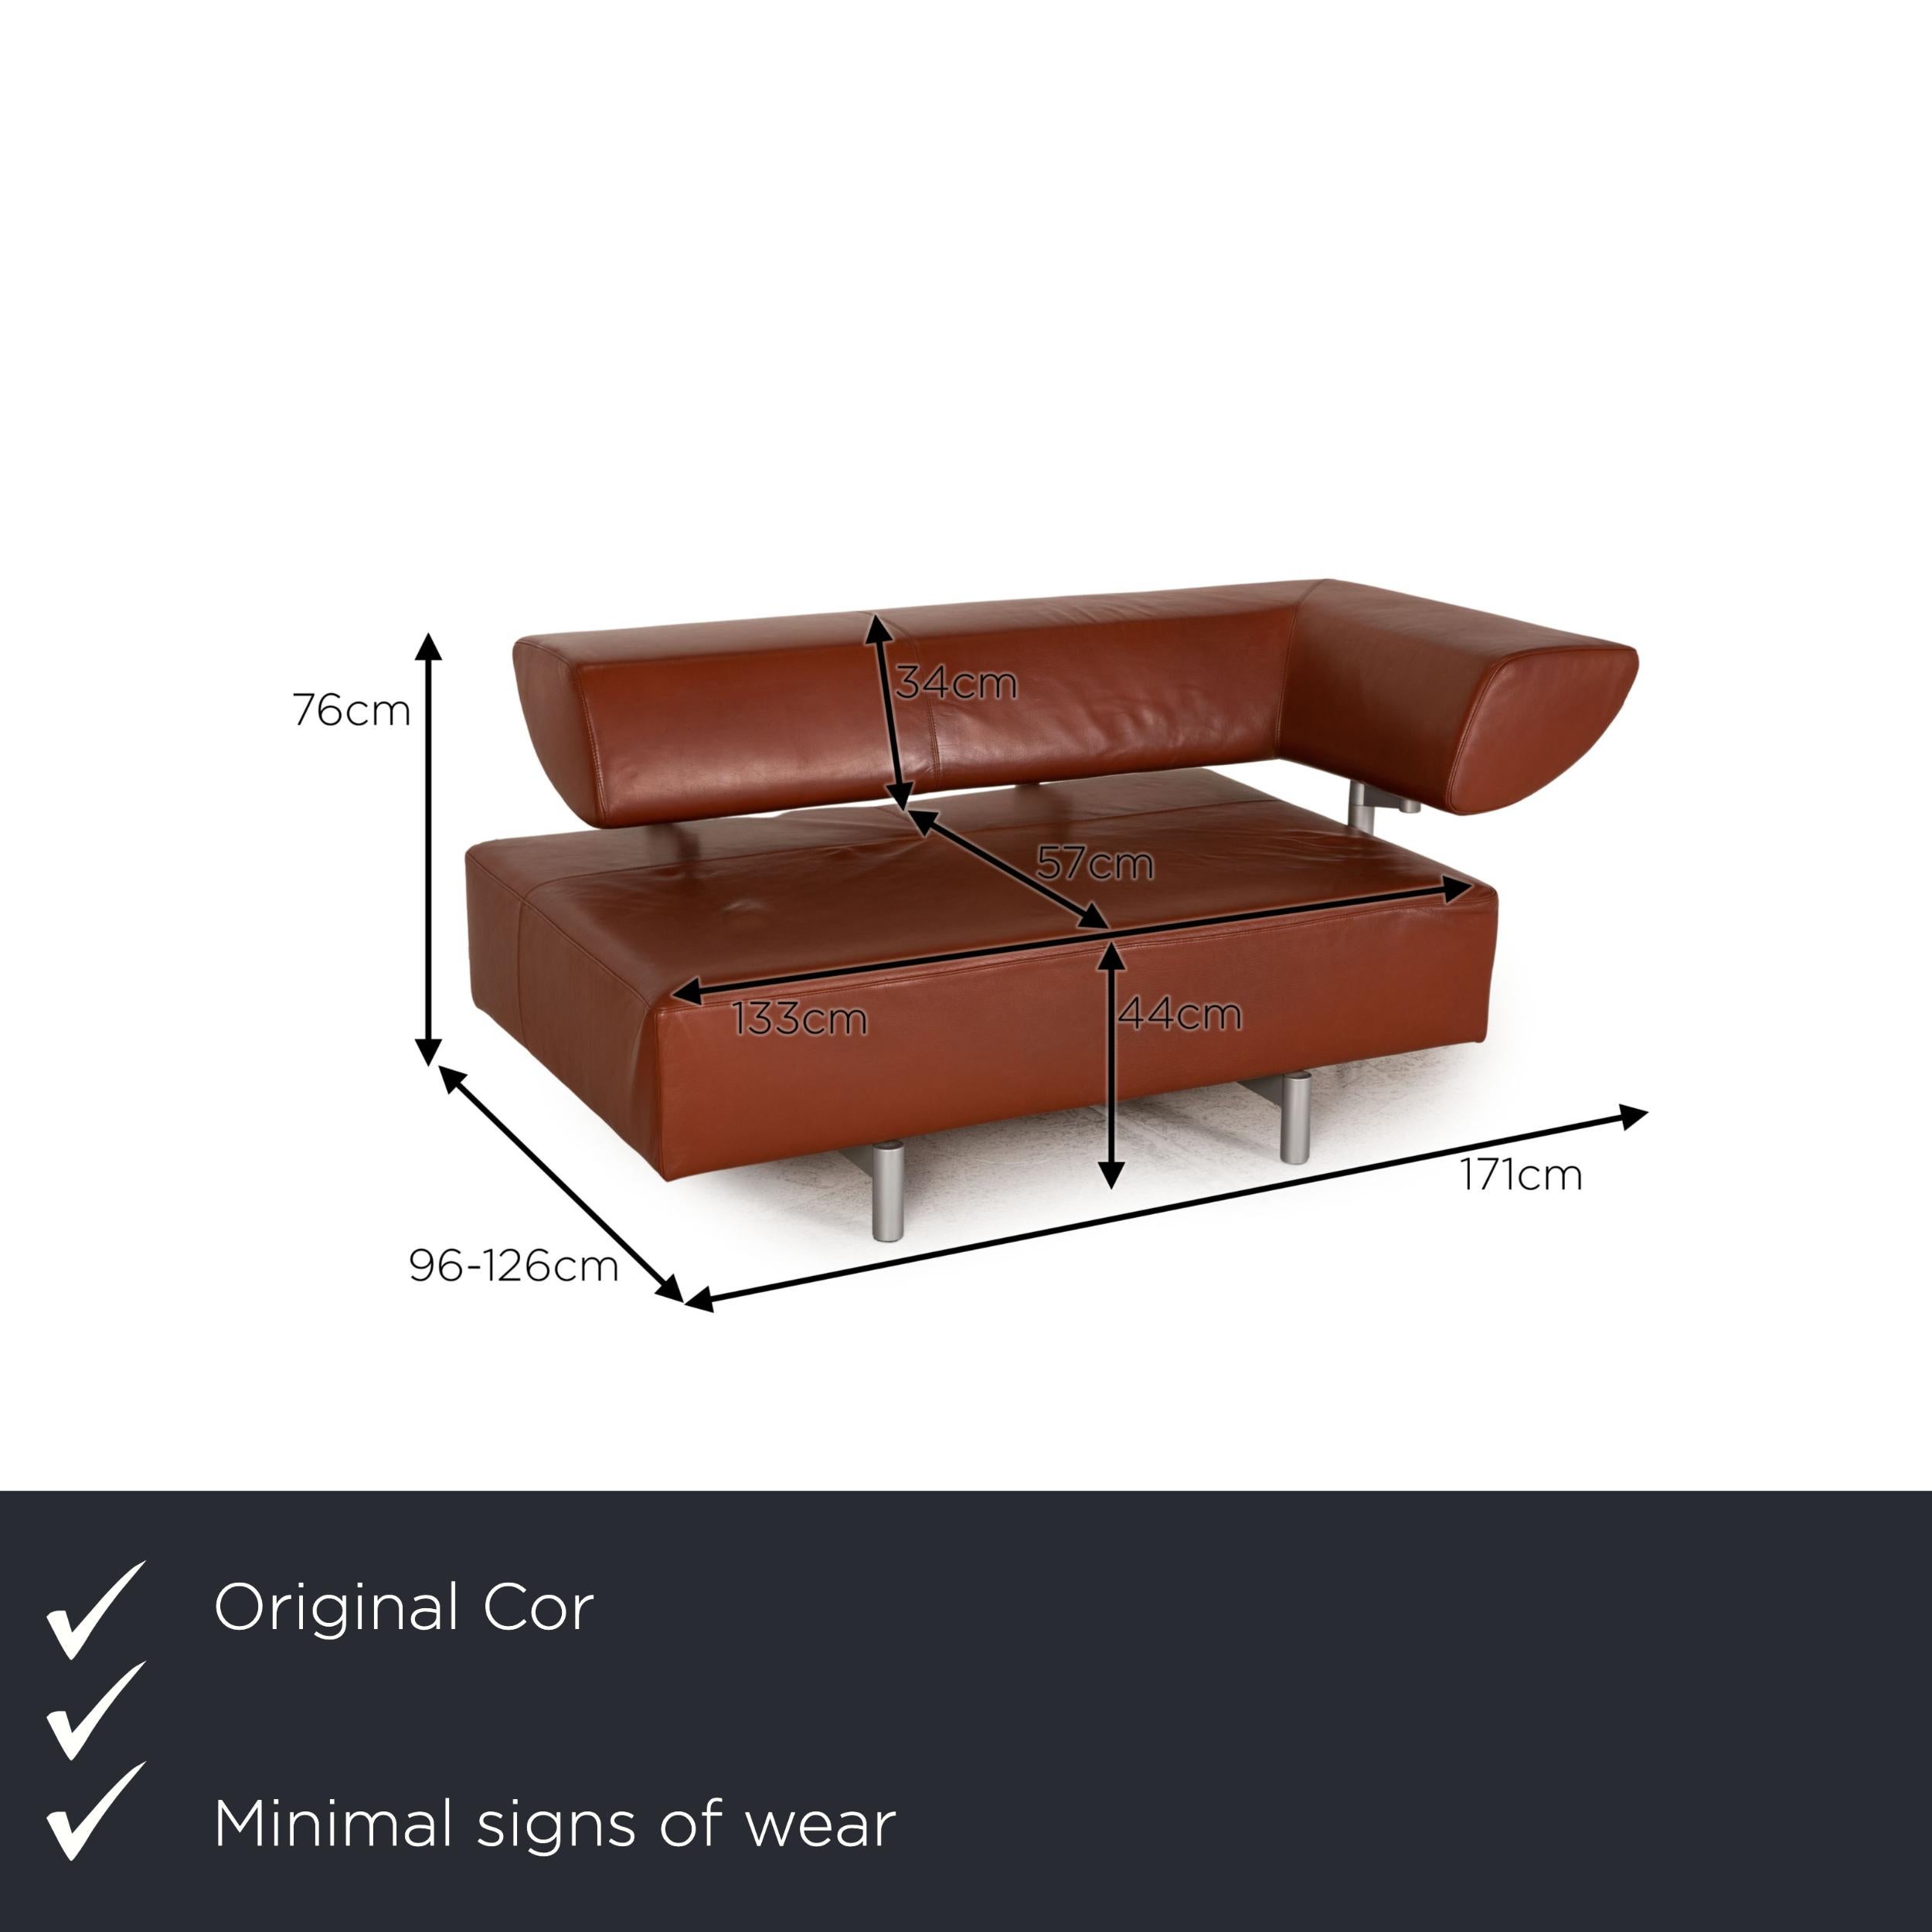 We present to you a COR Arthe leather sofa brown two-seater couch.

Product measurements in centimeters:

depth: 96
width: 171
height: 76
seat height: 44
rest height: 76
seat depth: 57
seat width: 133
back height: 34.

 